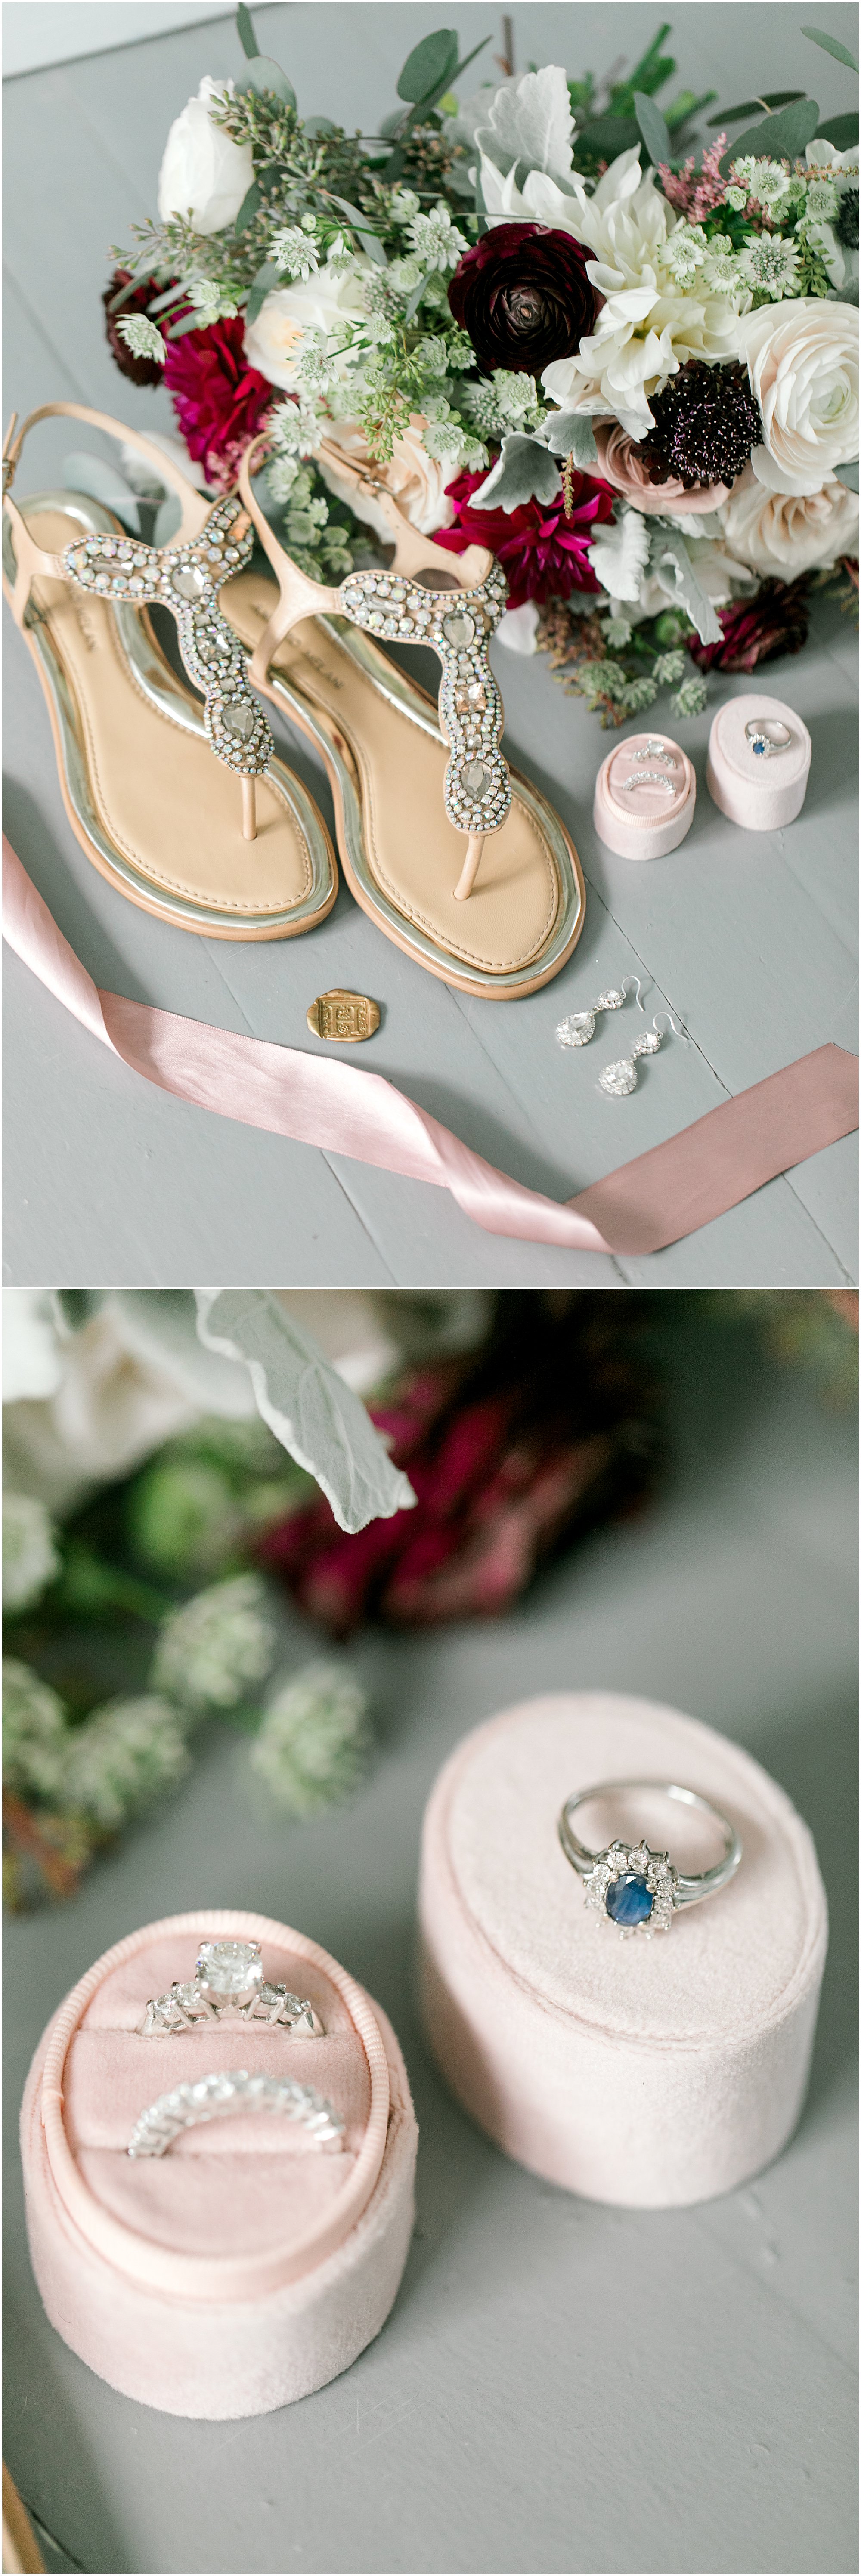 Dusty rose sash and other accessories for the bride. 